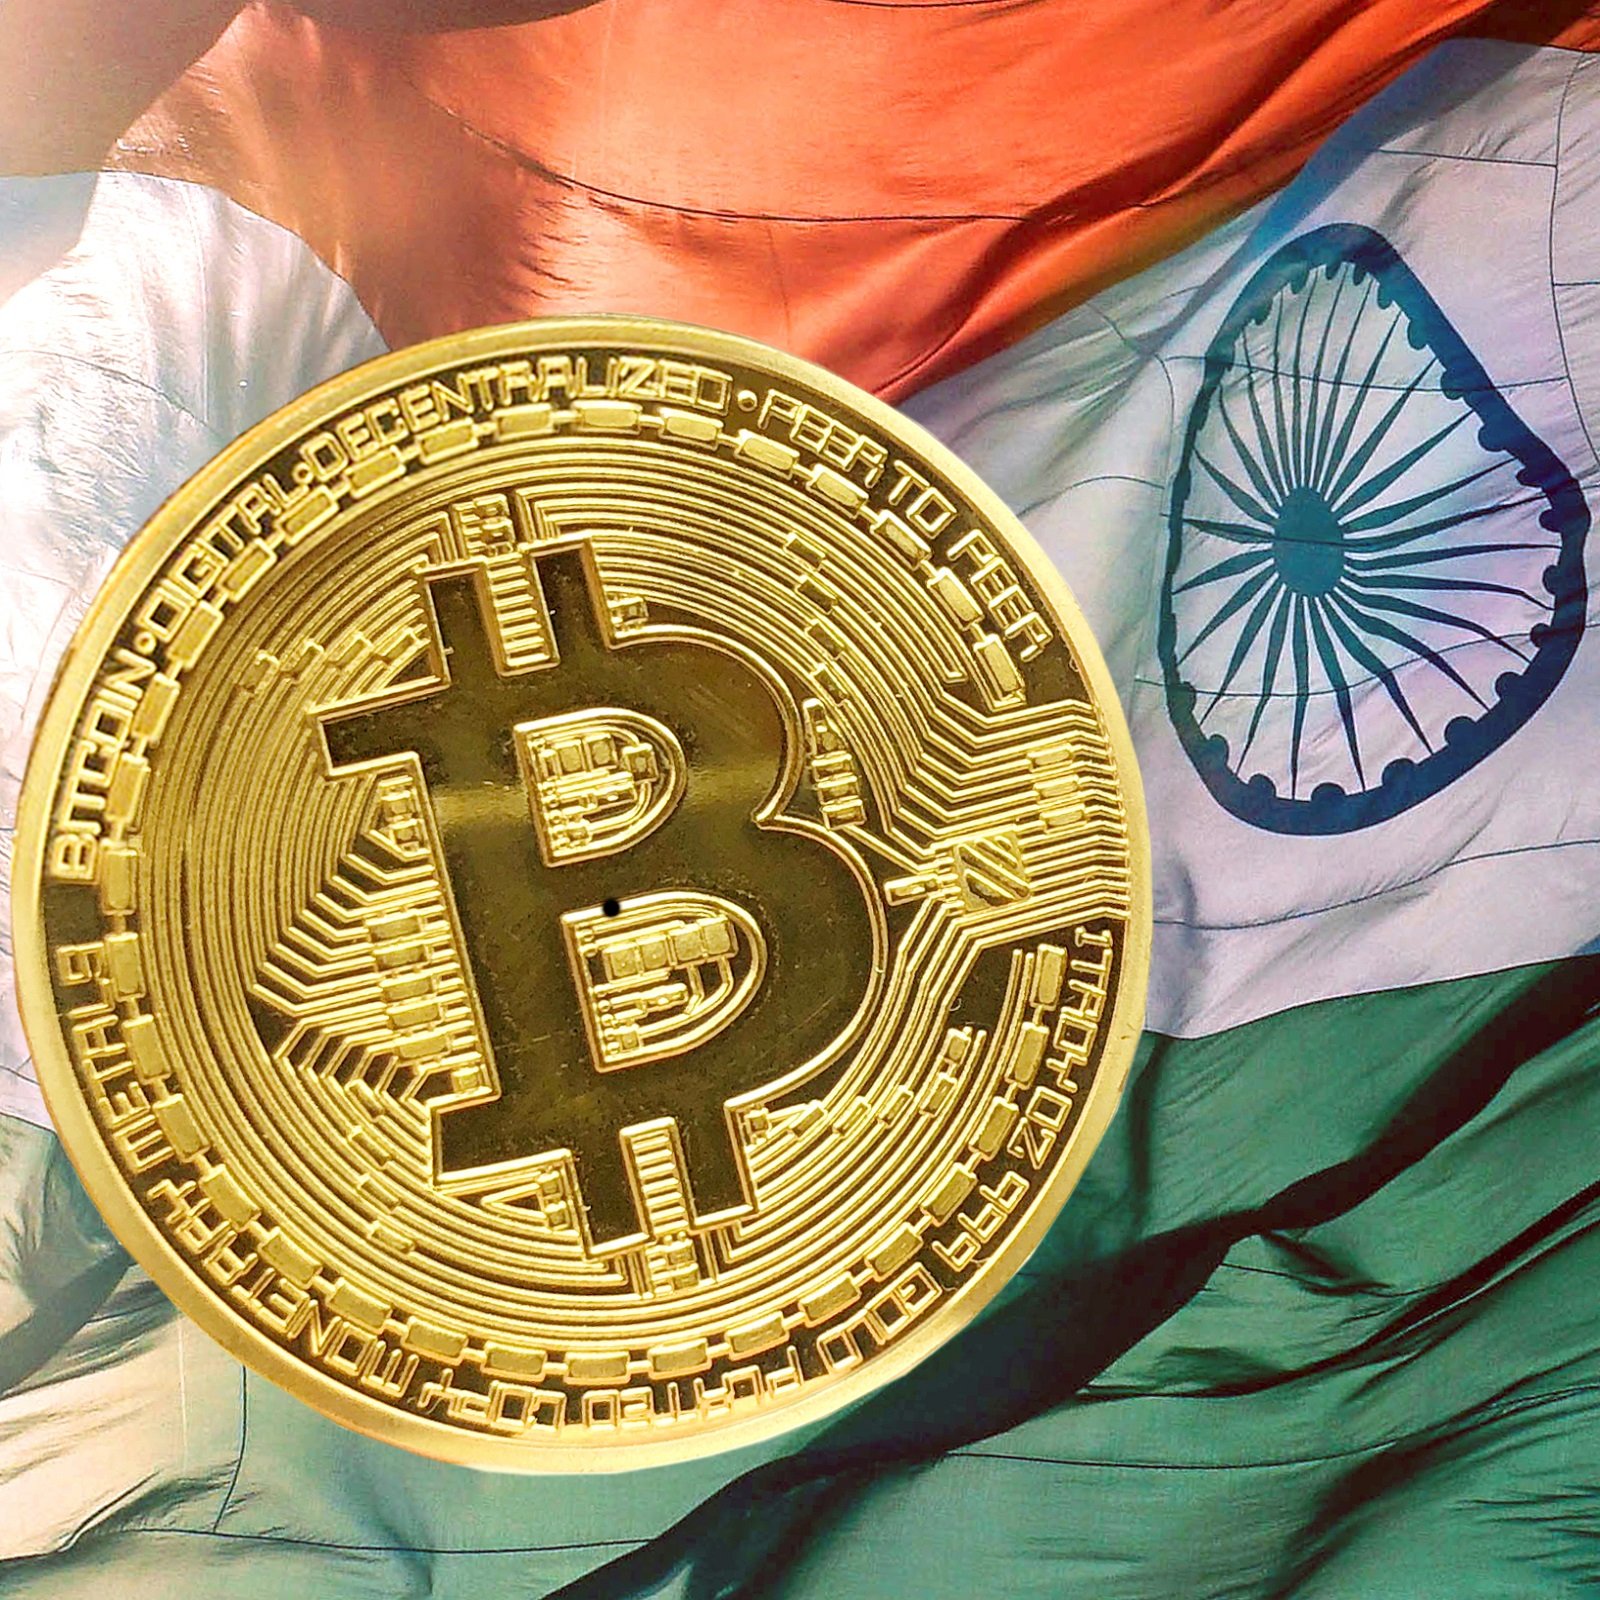 Roles of Regulators Decided in India, Rules on Bitcoin Coming Soon